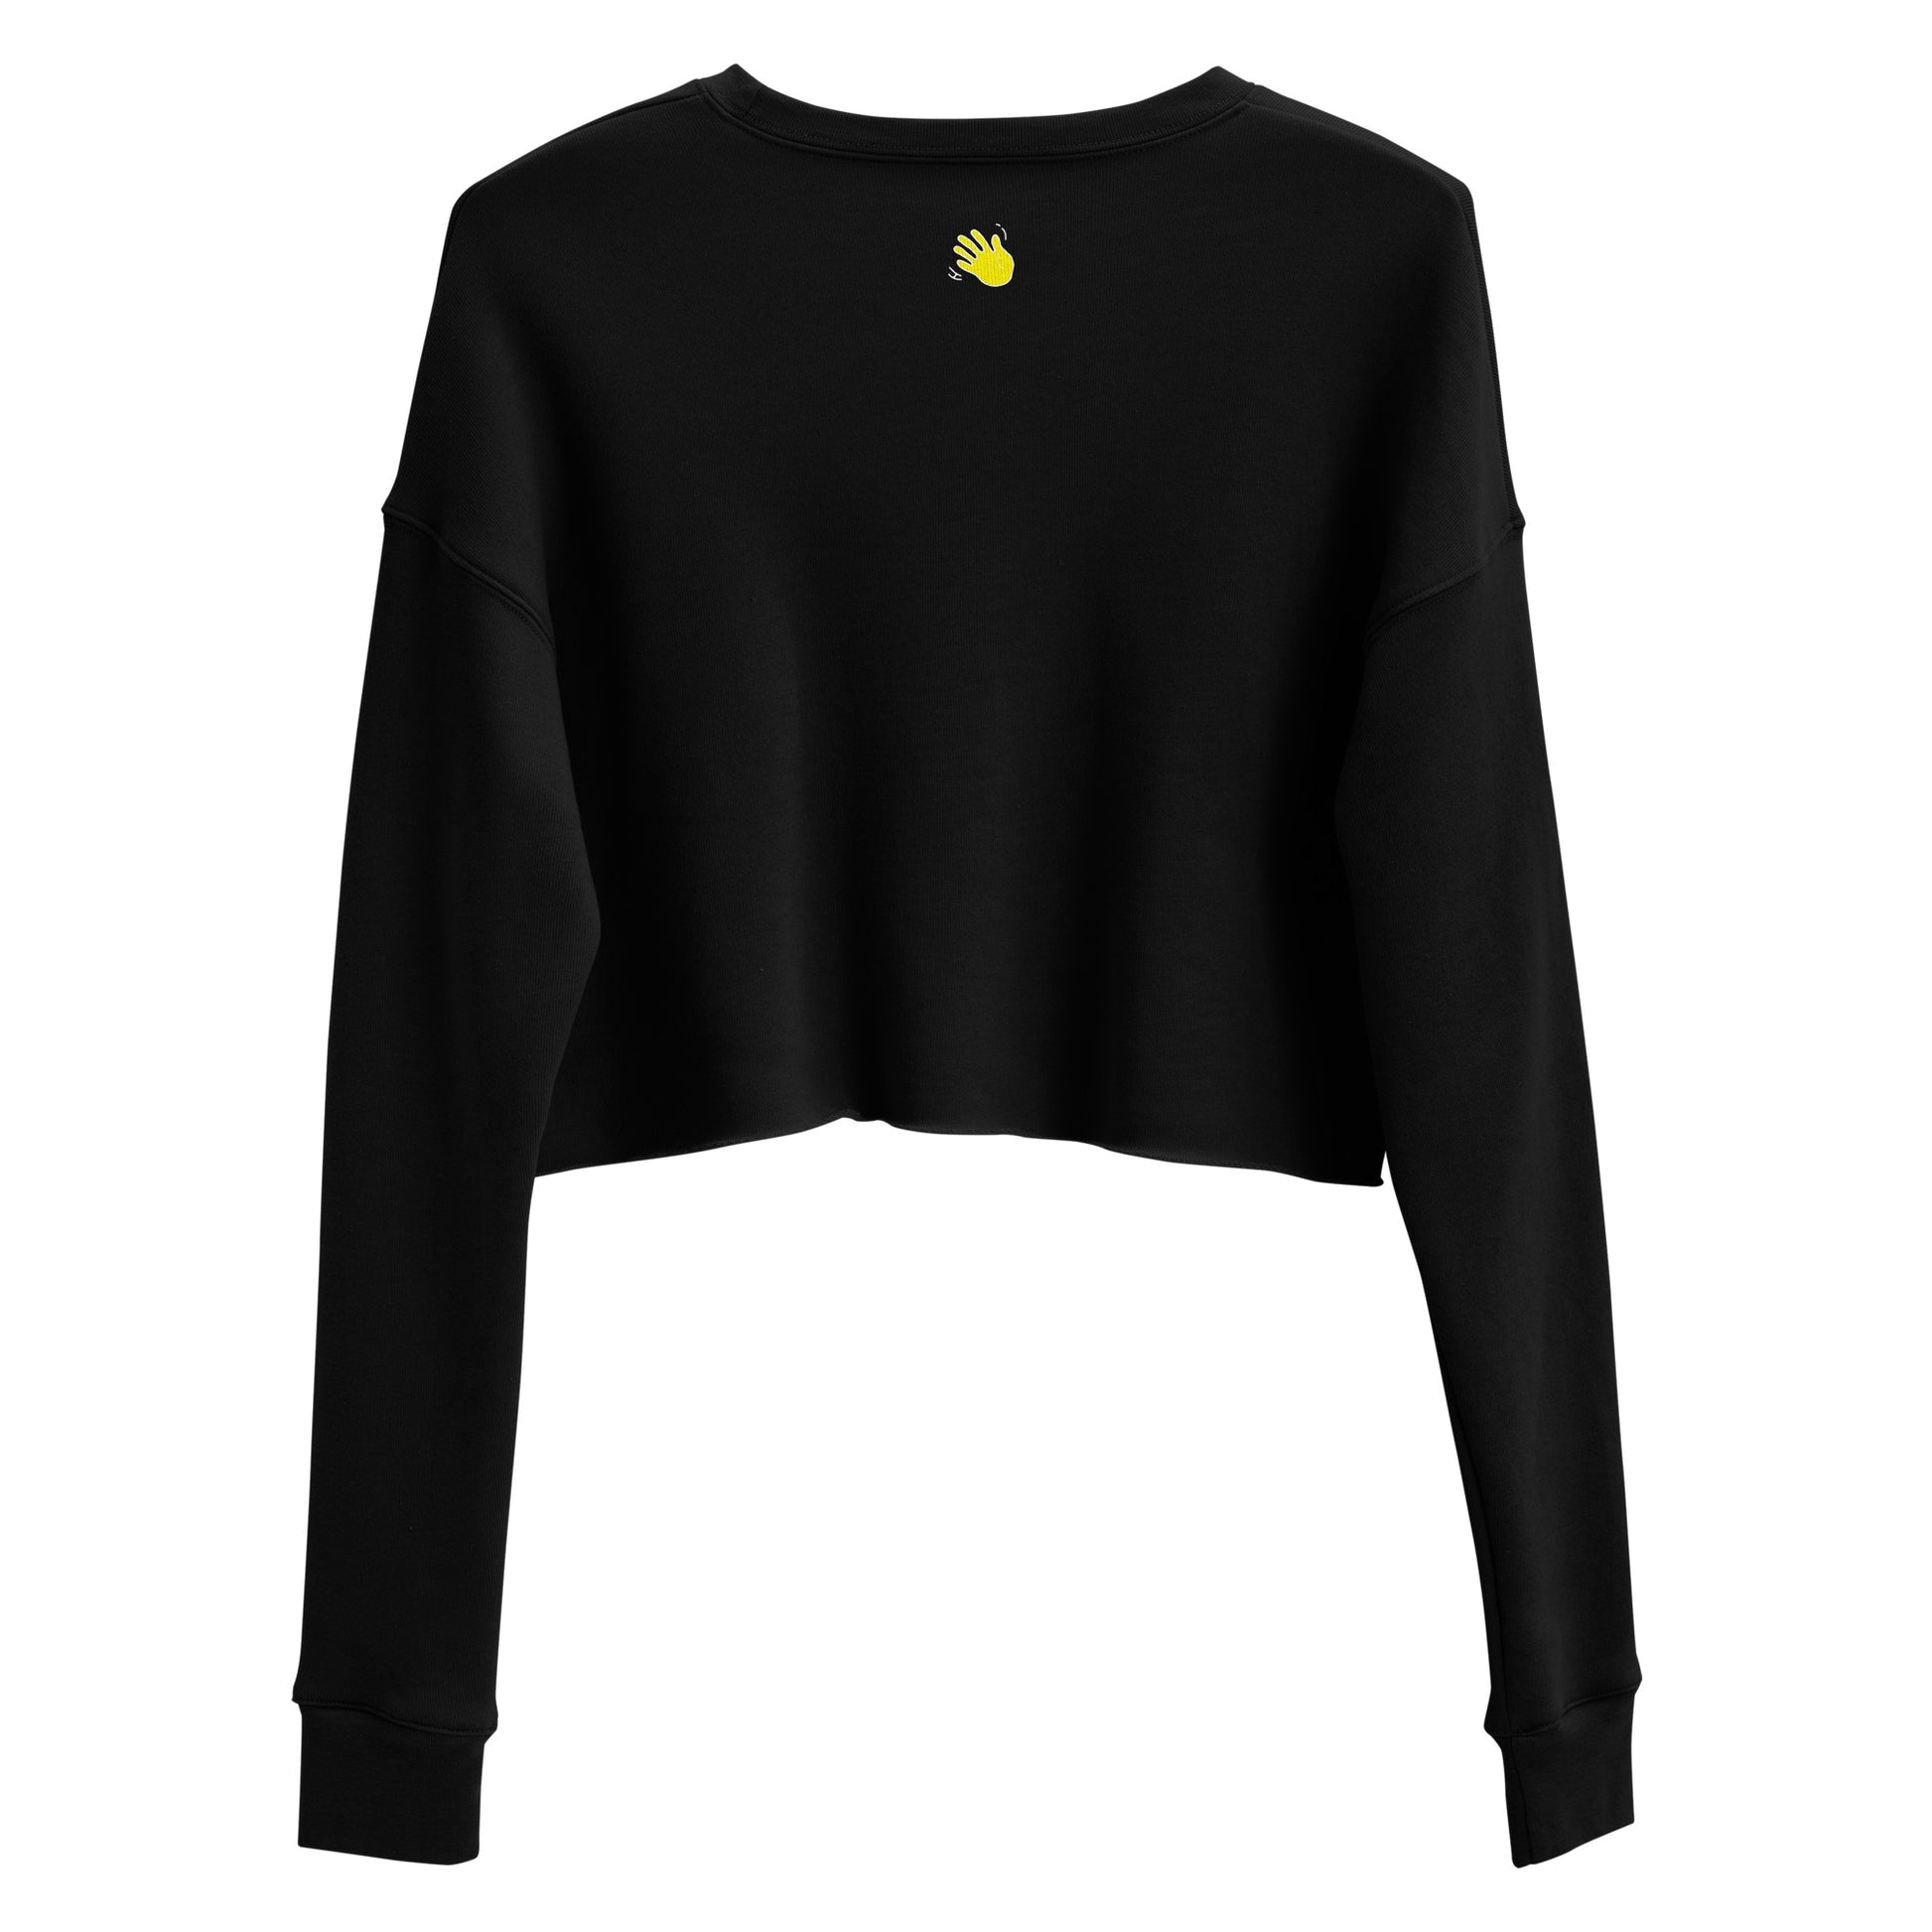 Hi Cropped Sweatshirt from Happy interactions in Black おはよう "Ohayo" — Good Morning in Japanese